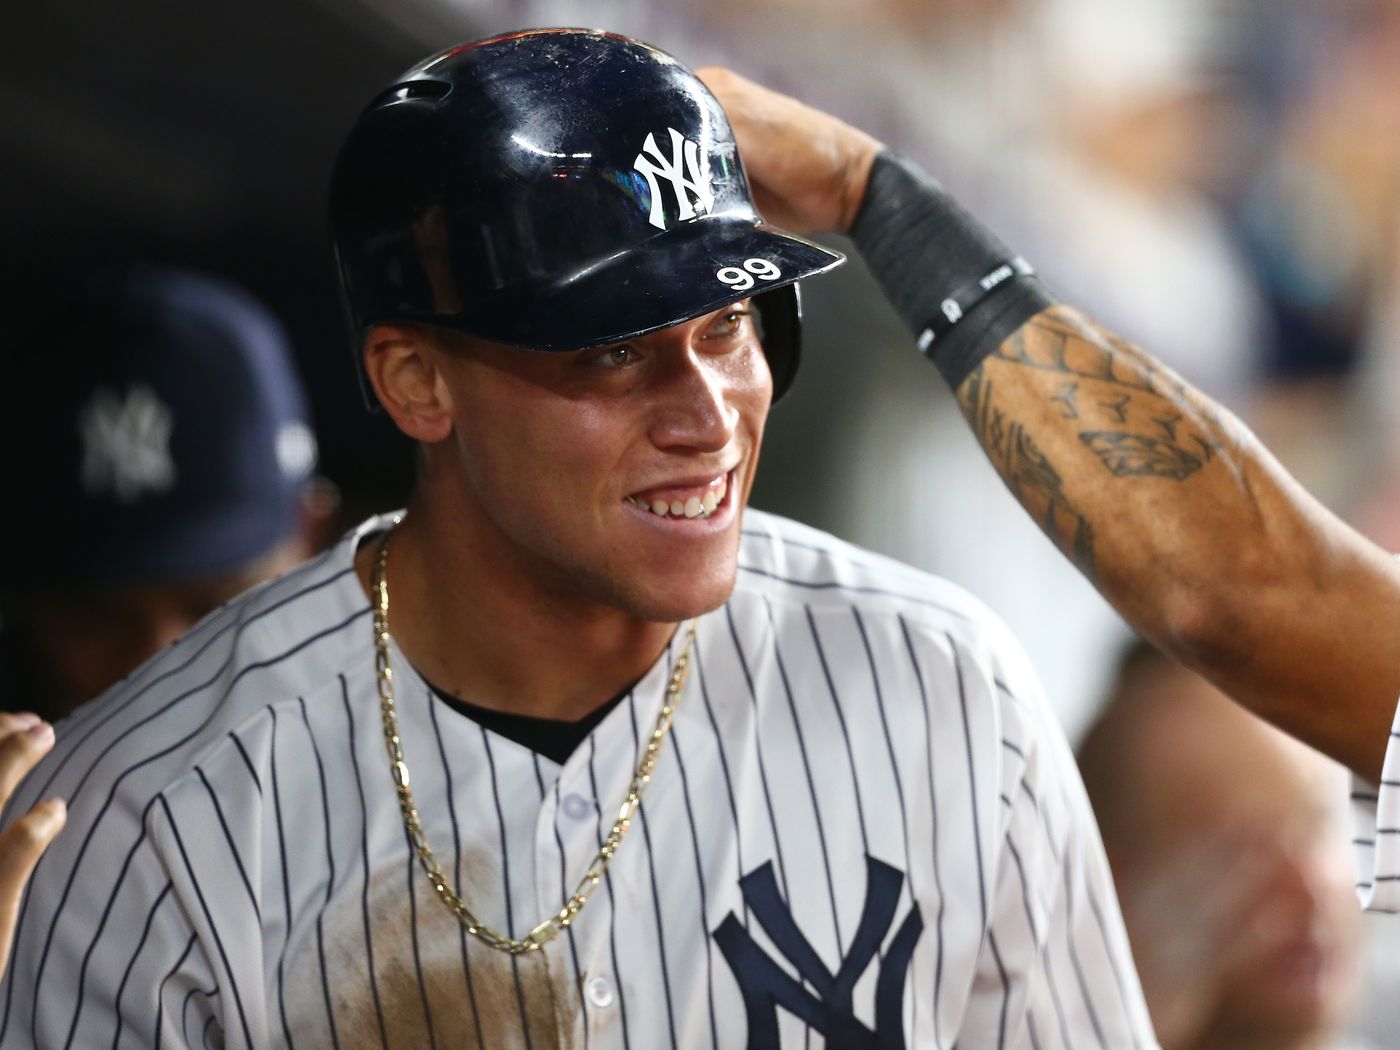 Aaron Judge Is Playing Like a Star. Will He Be Paid Like One